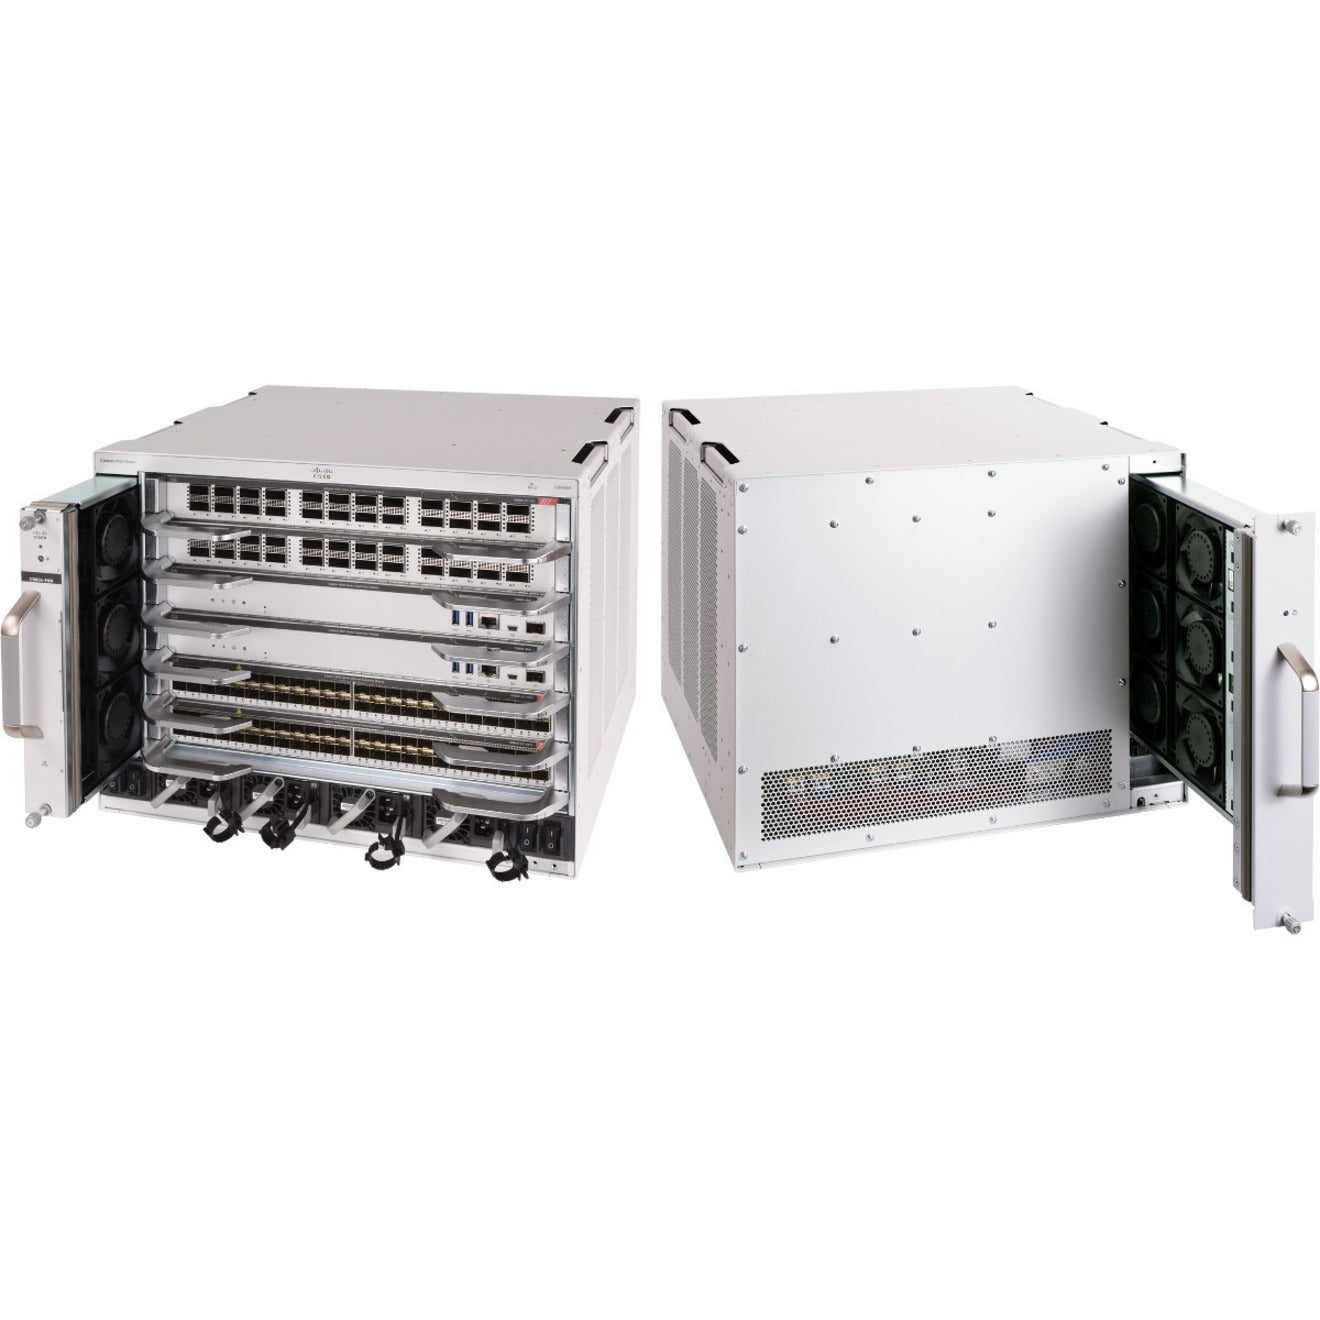 Cisco Catalyst 9600 Series 6 Switch Chassis